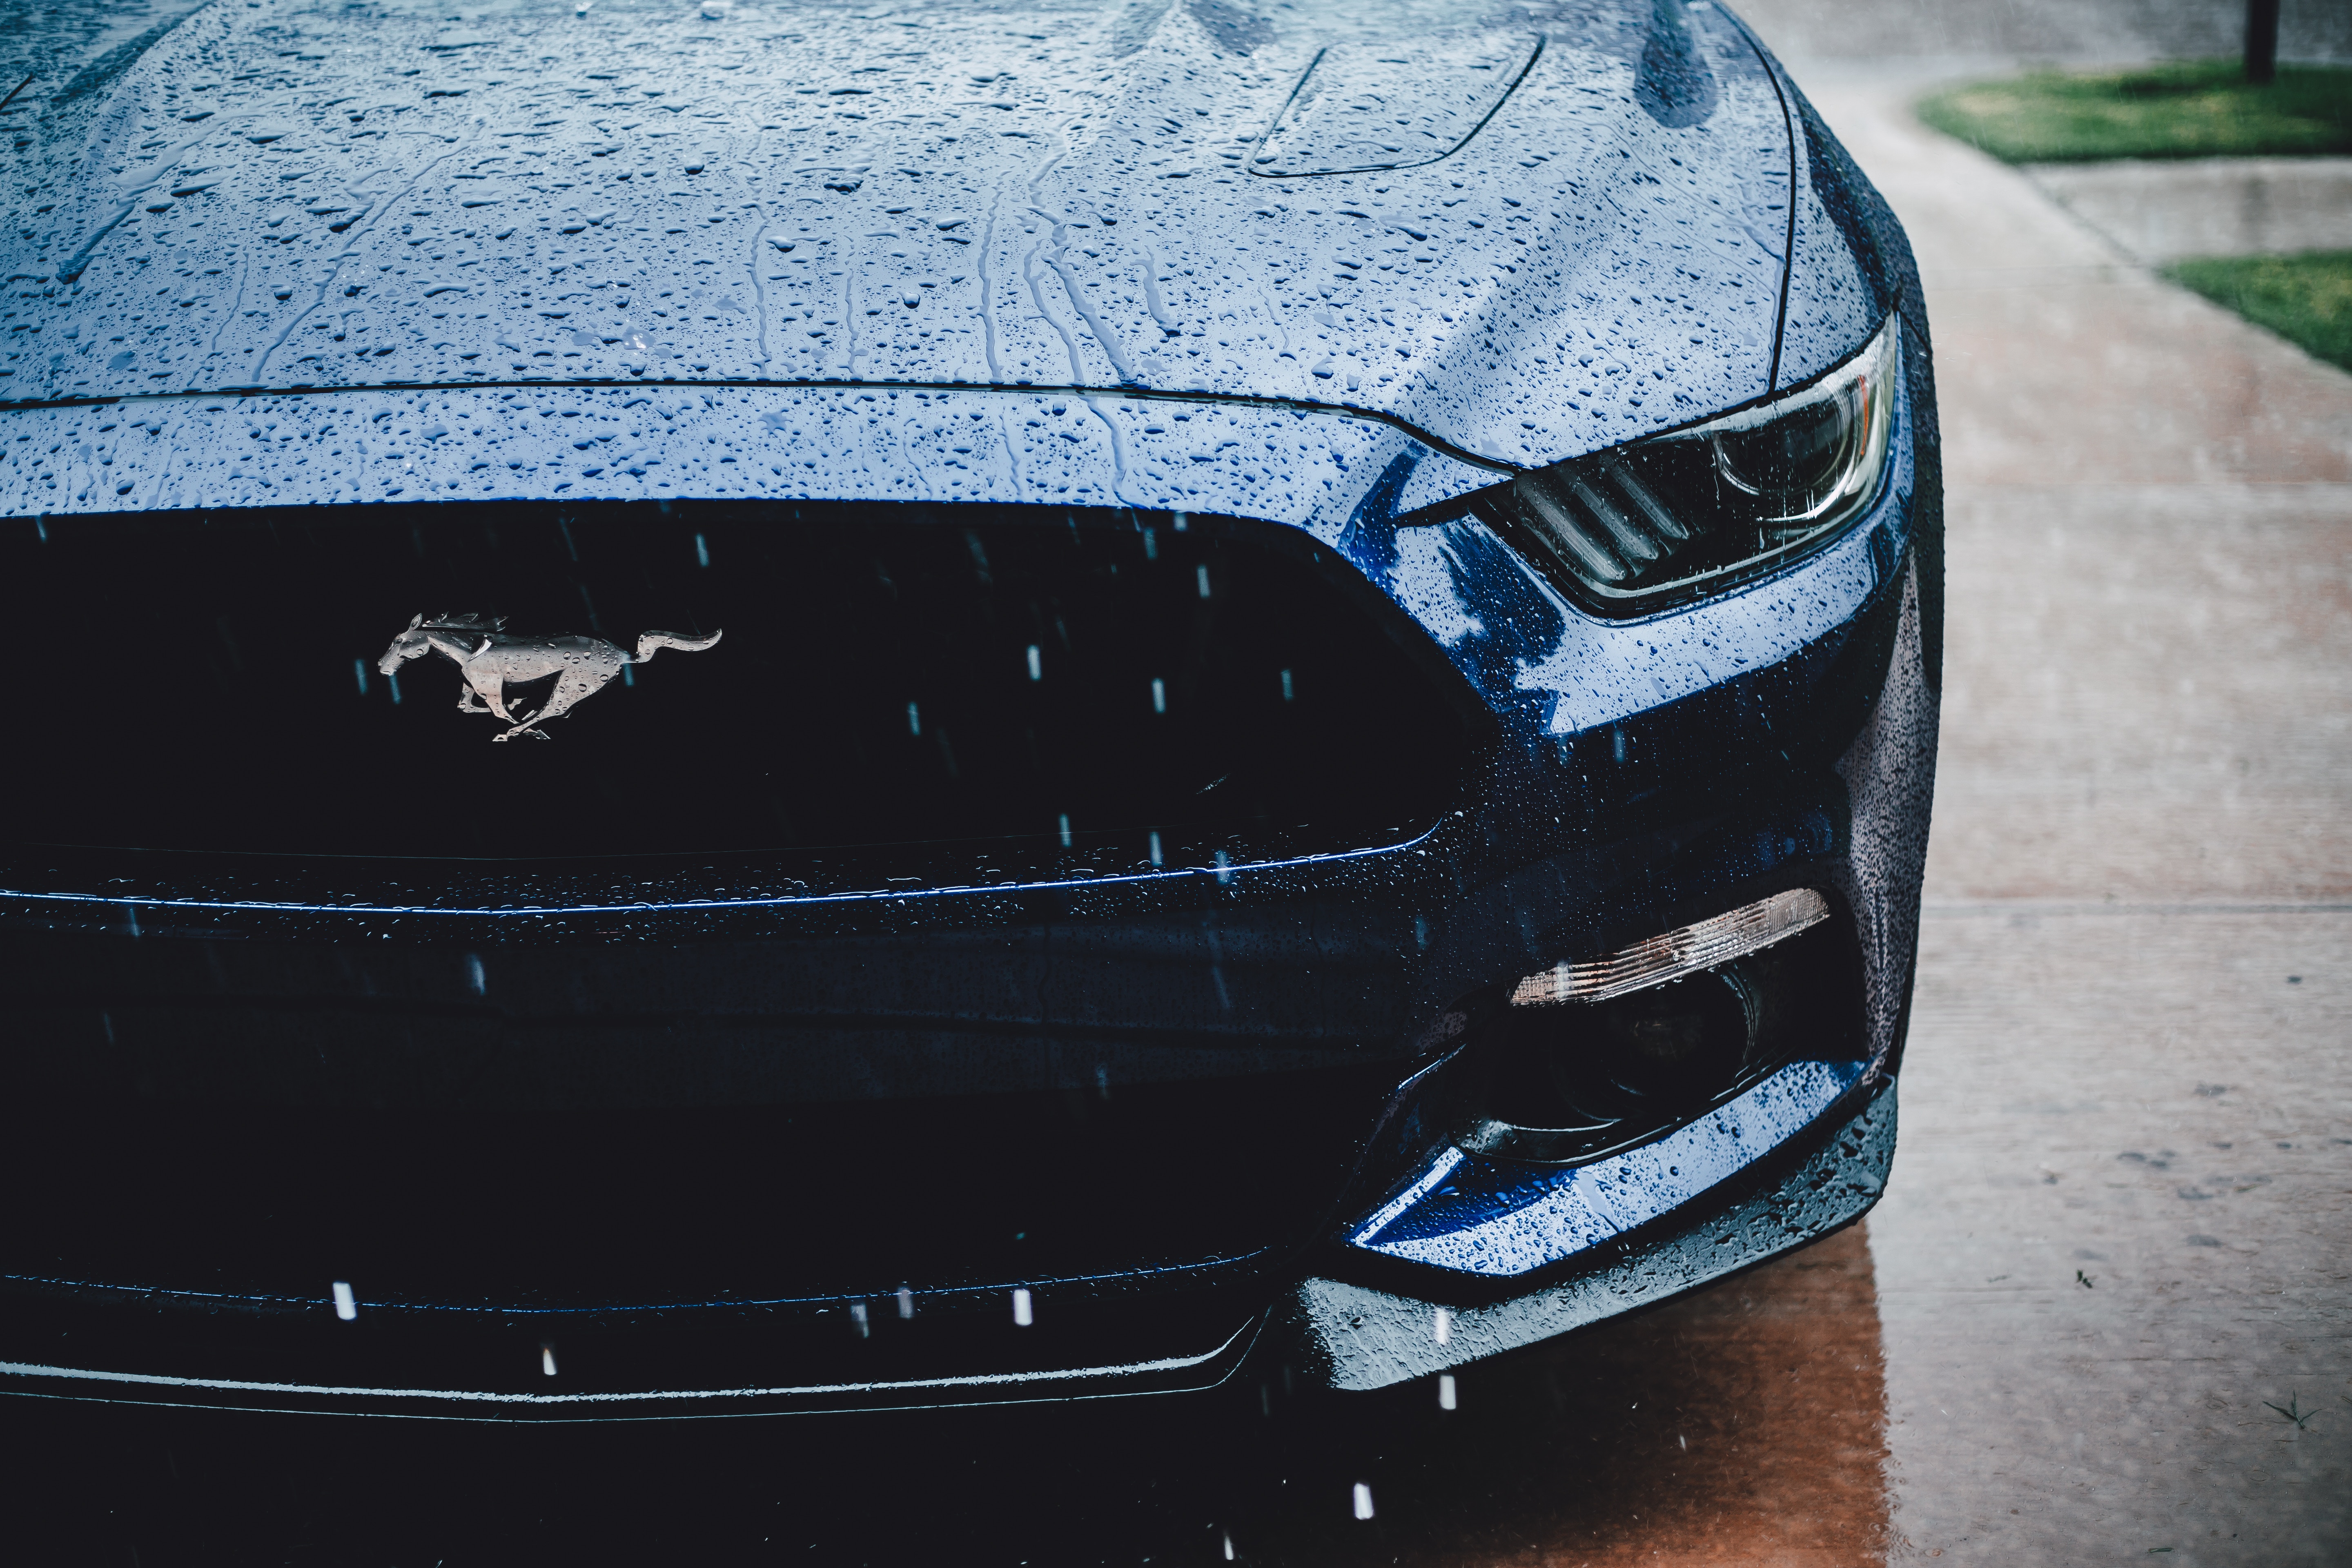 1920x1080 Background ford mustang, cars, rain, front view, headlight